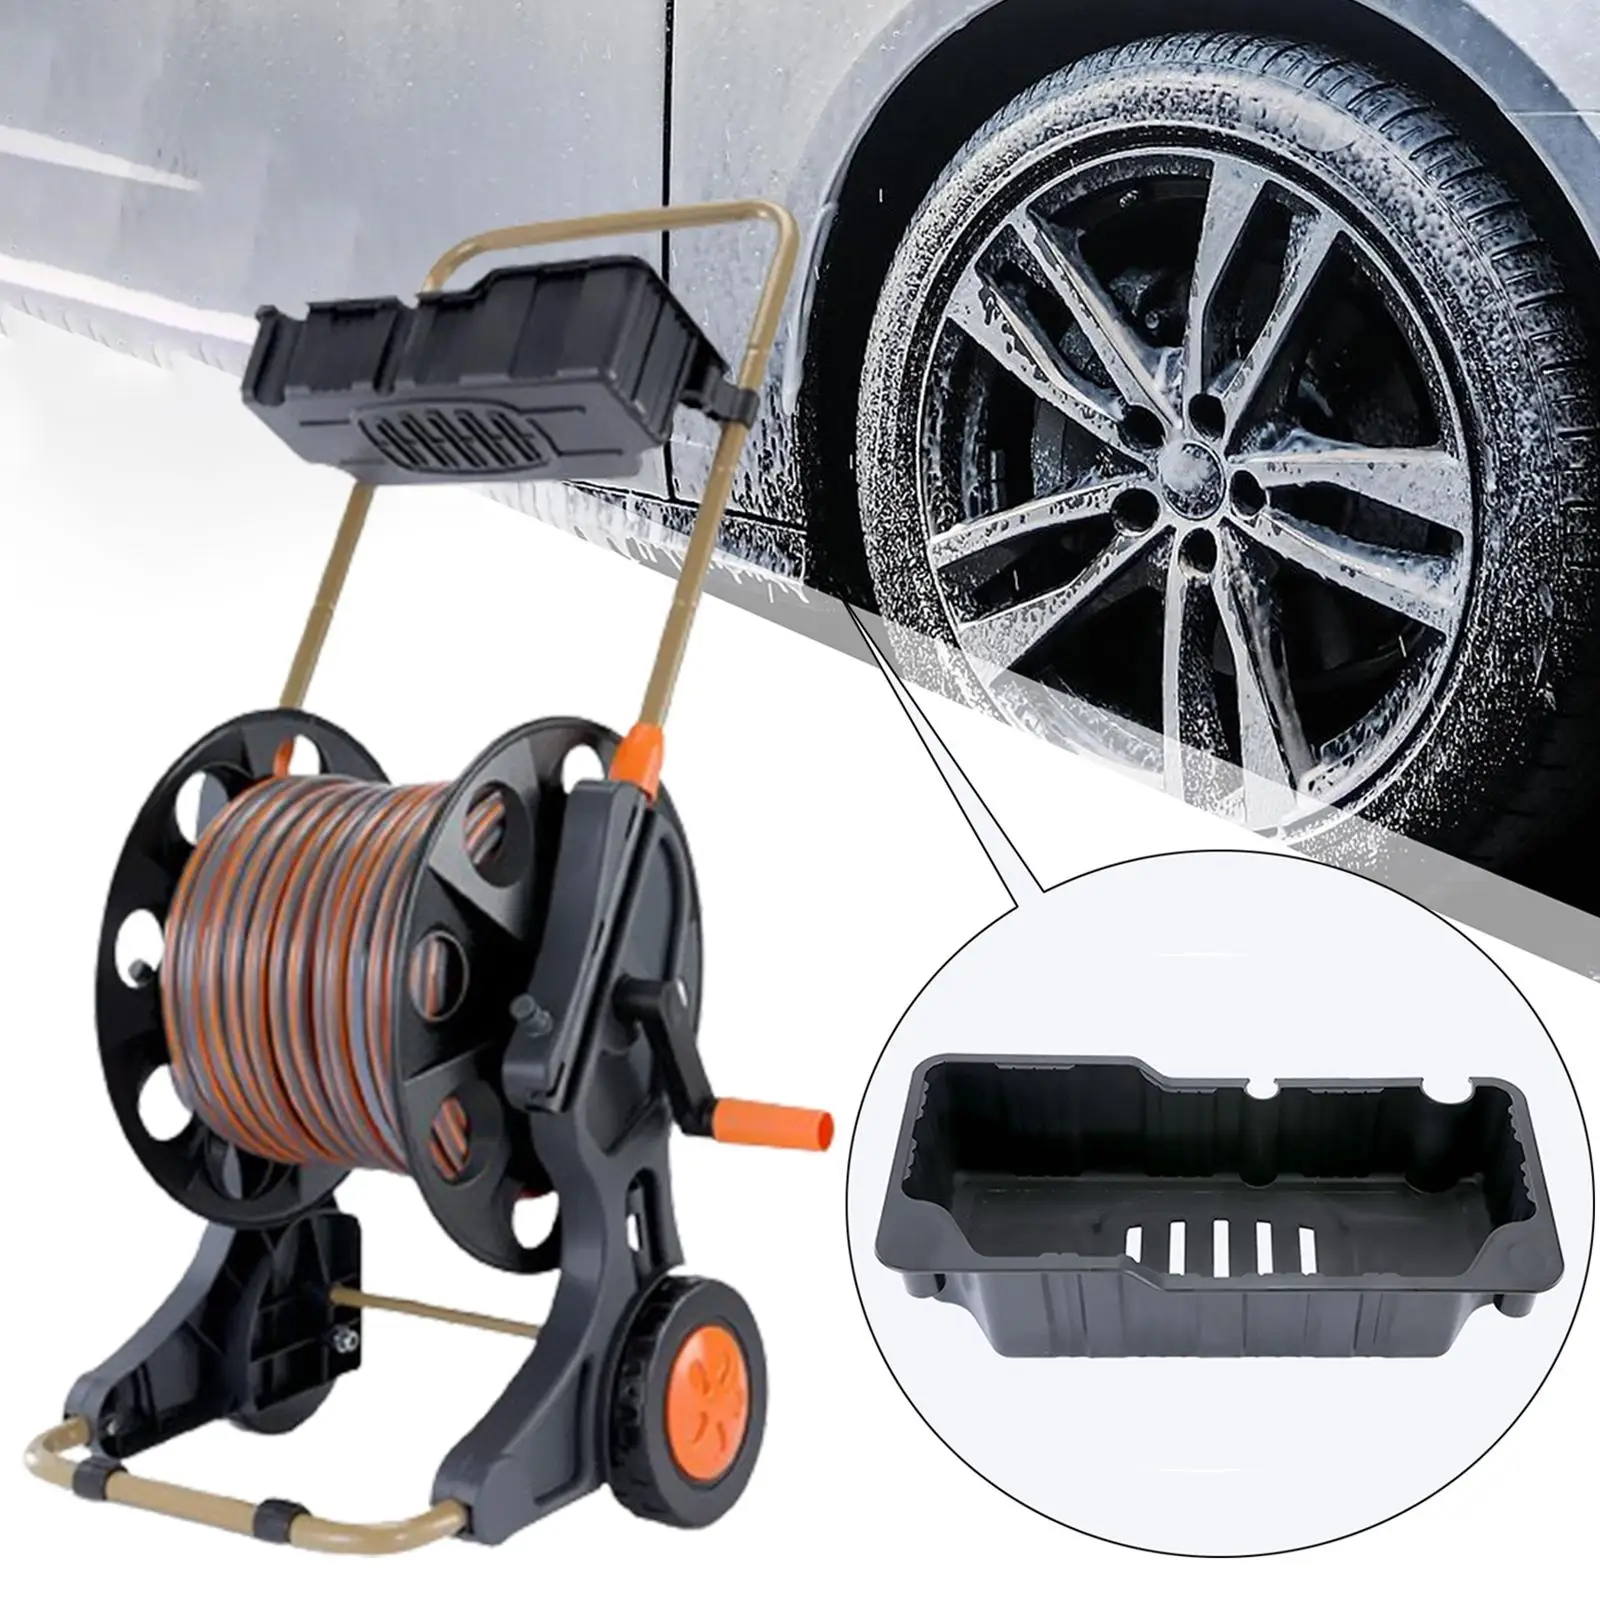 

Hose Reel Cart with Wheels Water Hose Holder, Hose Winding Reel Pipe Organizer, Pipe Storage Rack for Car Washing Farm Patio